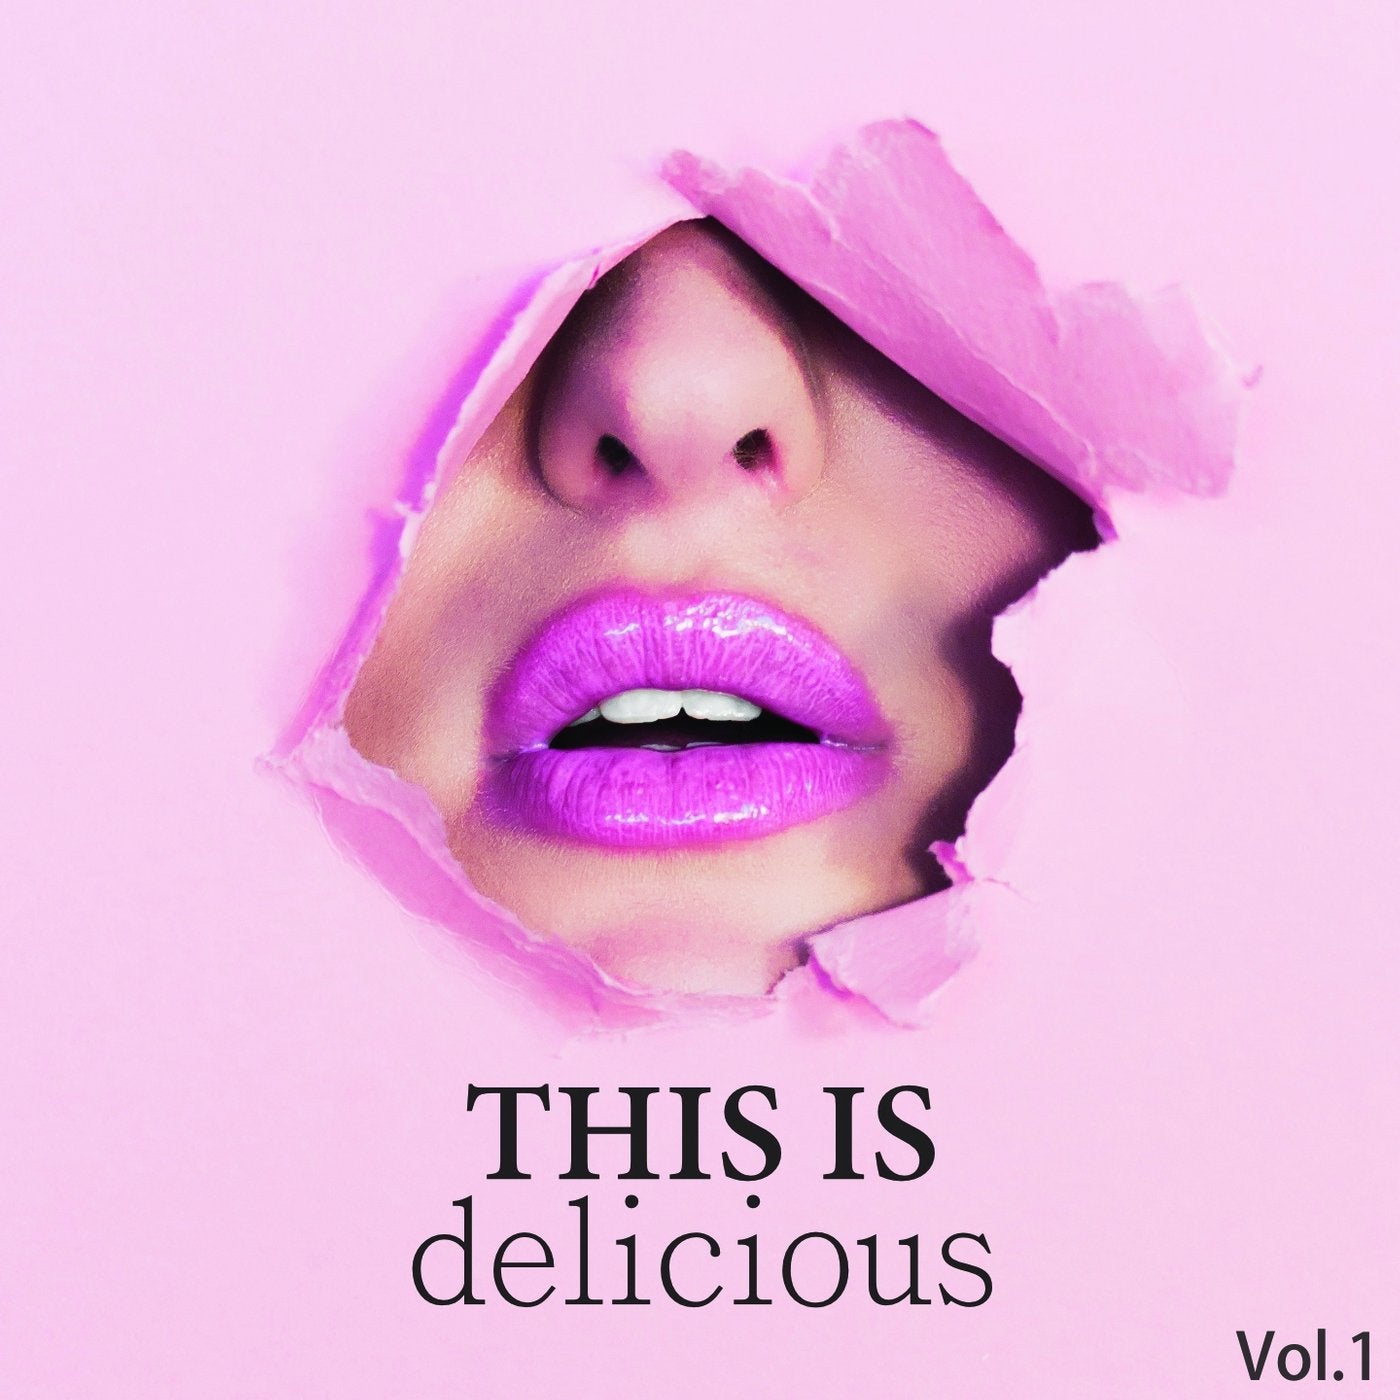 This Is Delicious, Vol. 1 (These Deep House Tunes Are Just.. Yummy !)